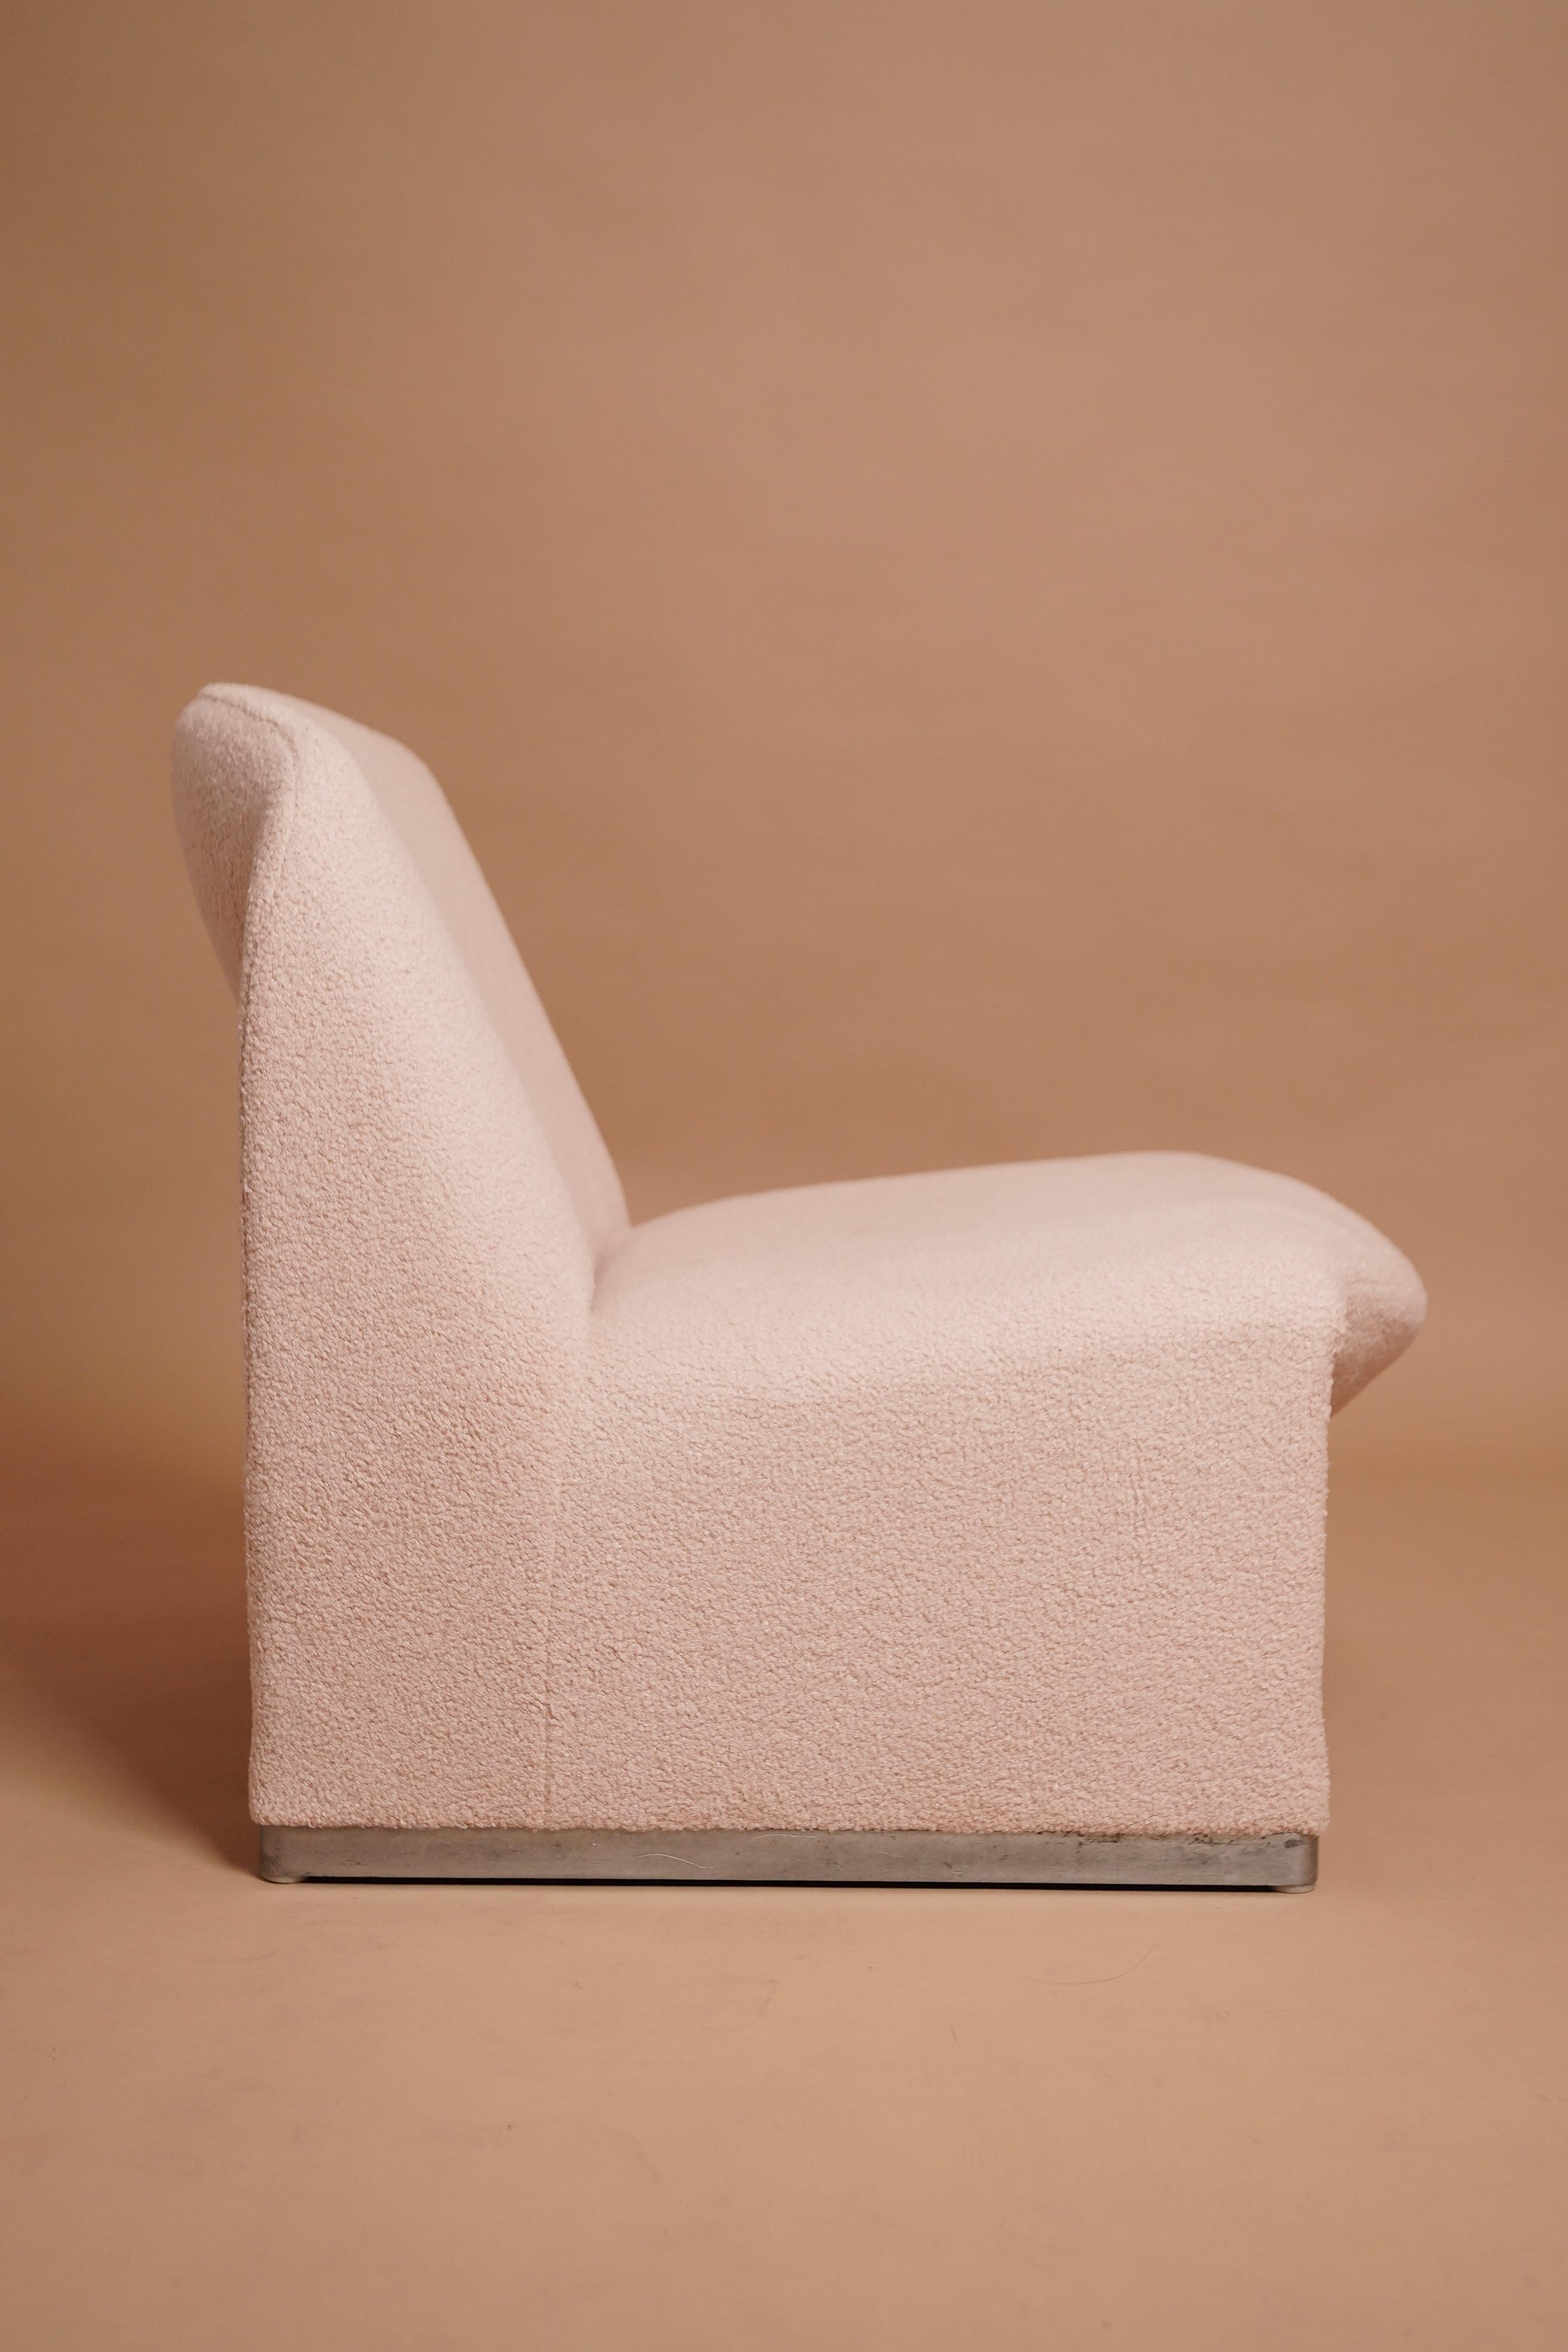 Italian Alky Chair By Giancarlo Piretti for Castelli 1970s For Sale